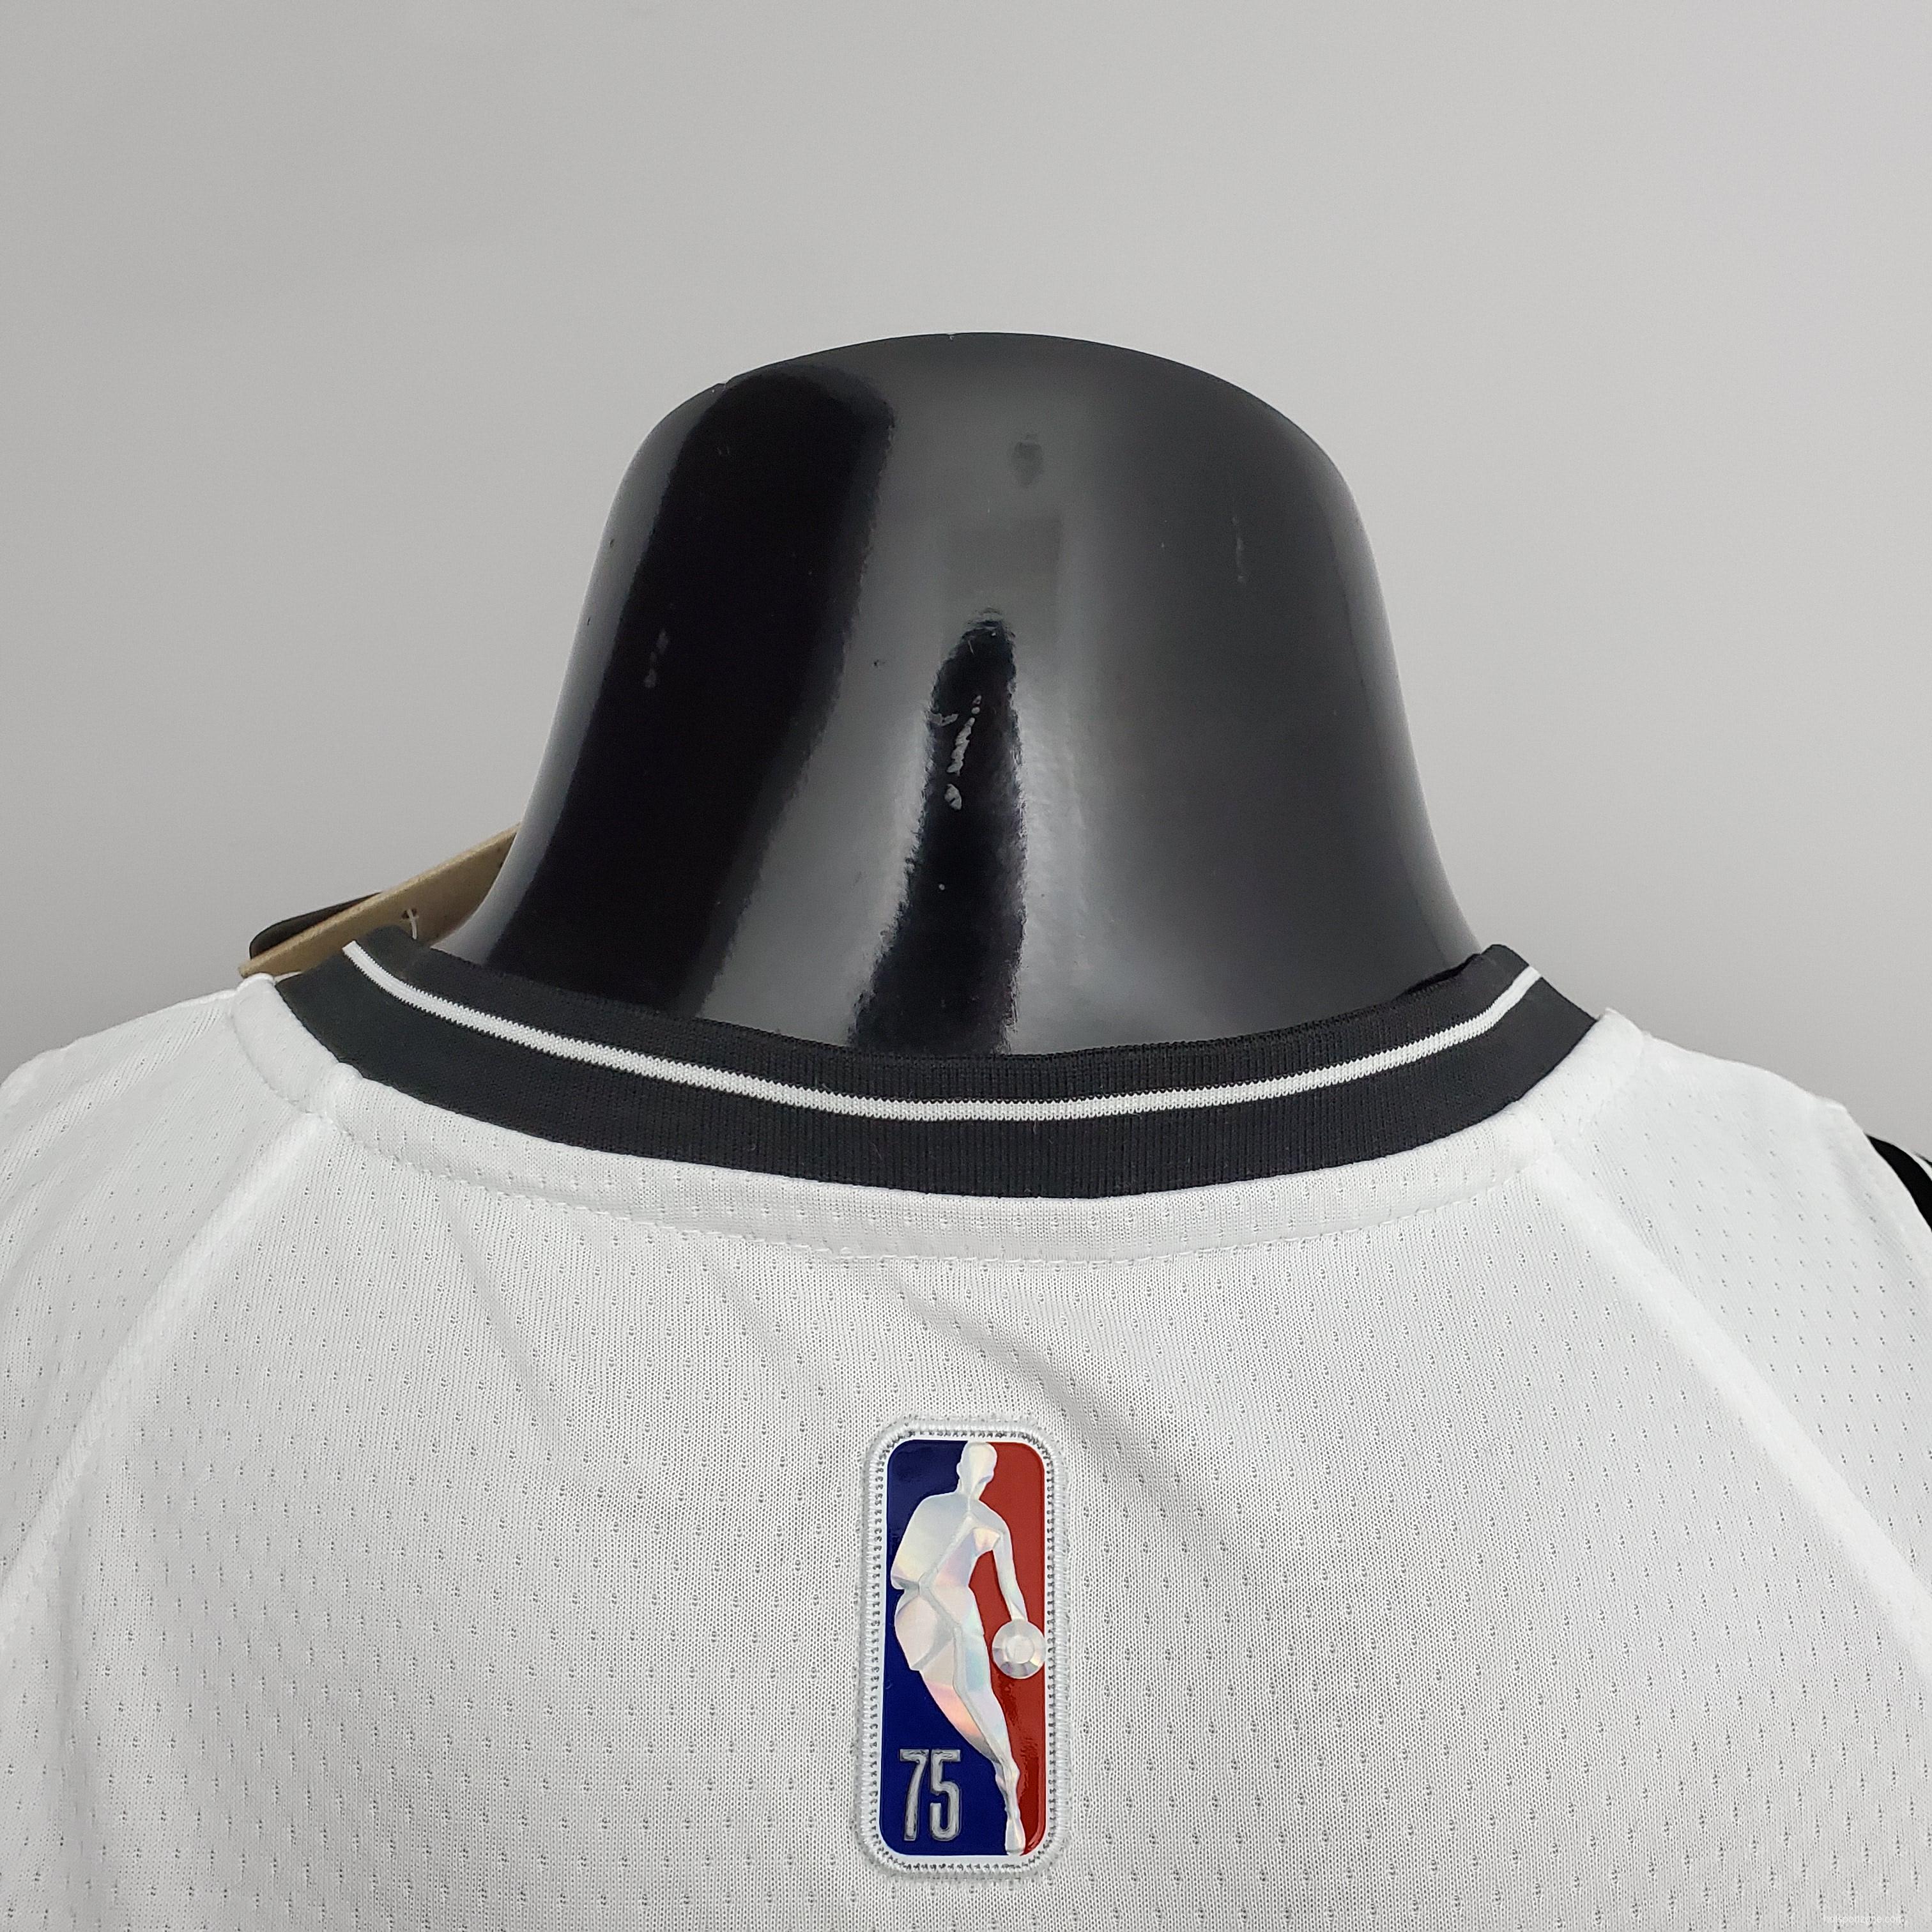 NBA 75th Anniversary Curry #30 Nets White Jersey